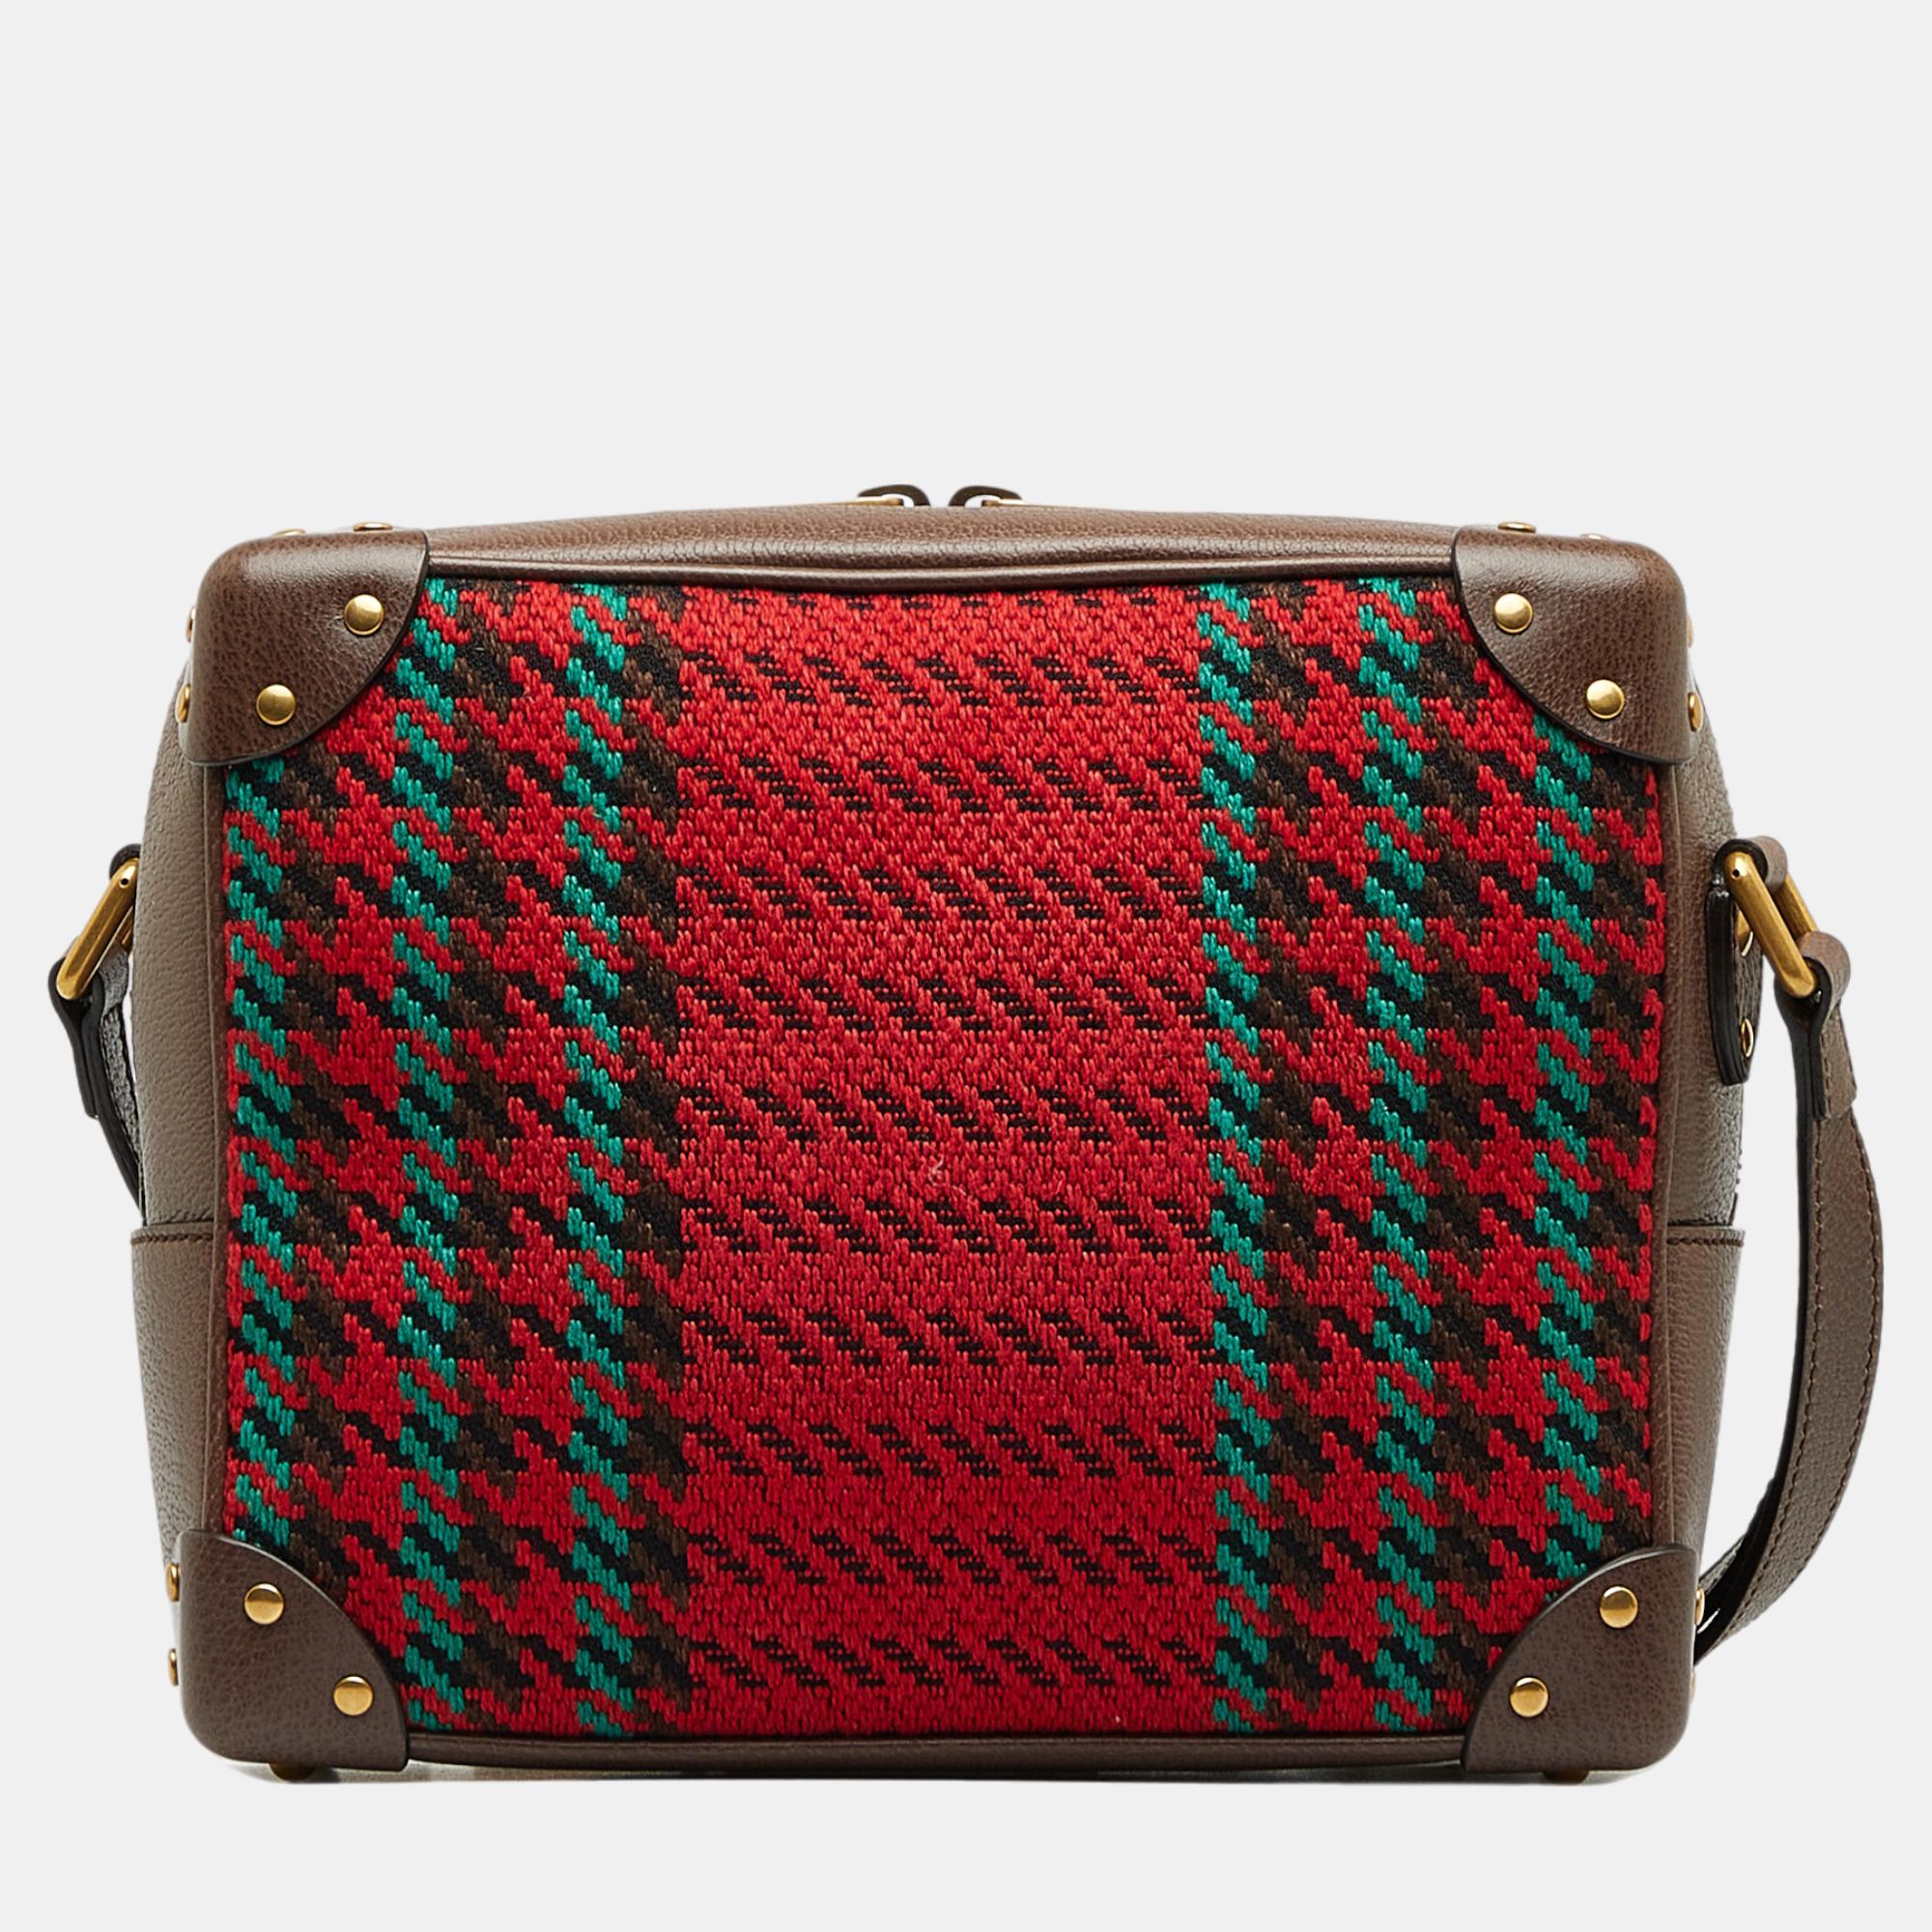 Gucci Brown/Red Houndstooth Soft Trunk Crossbody Bag